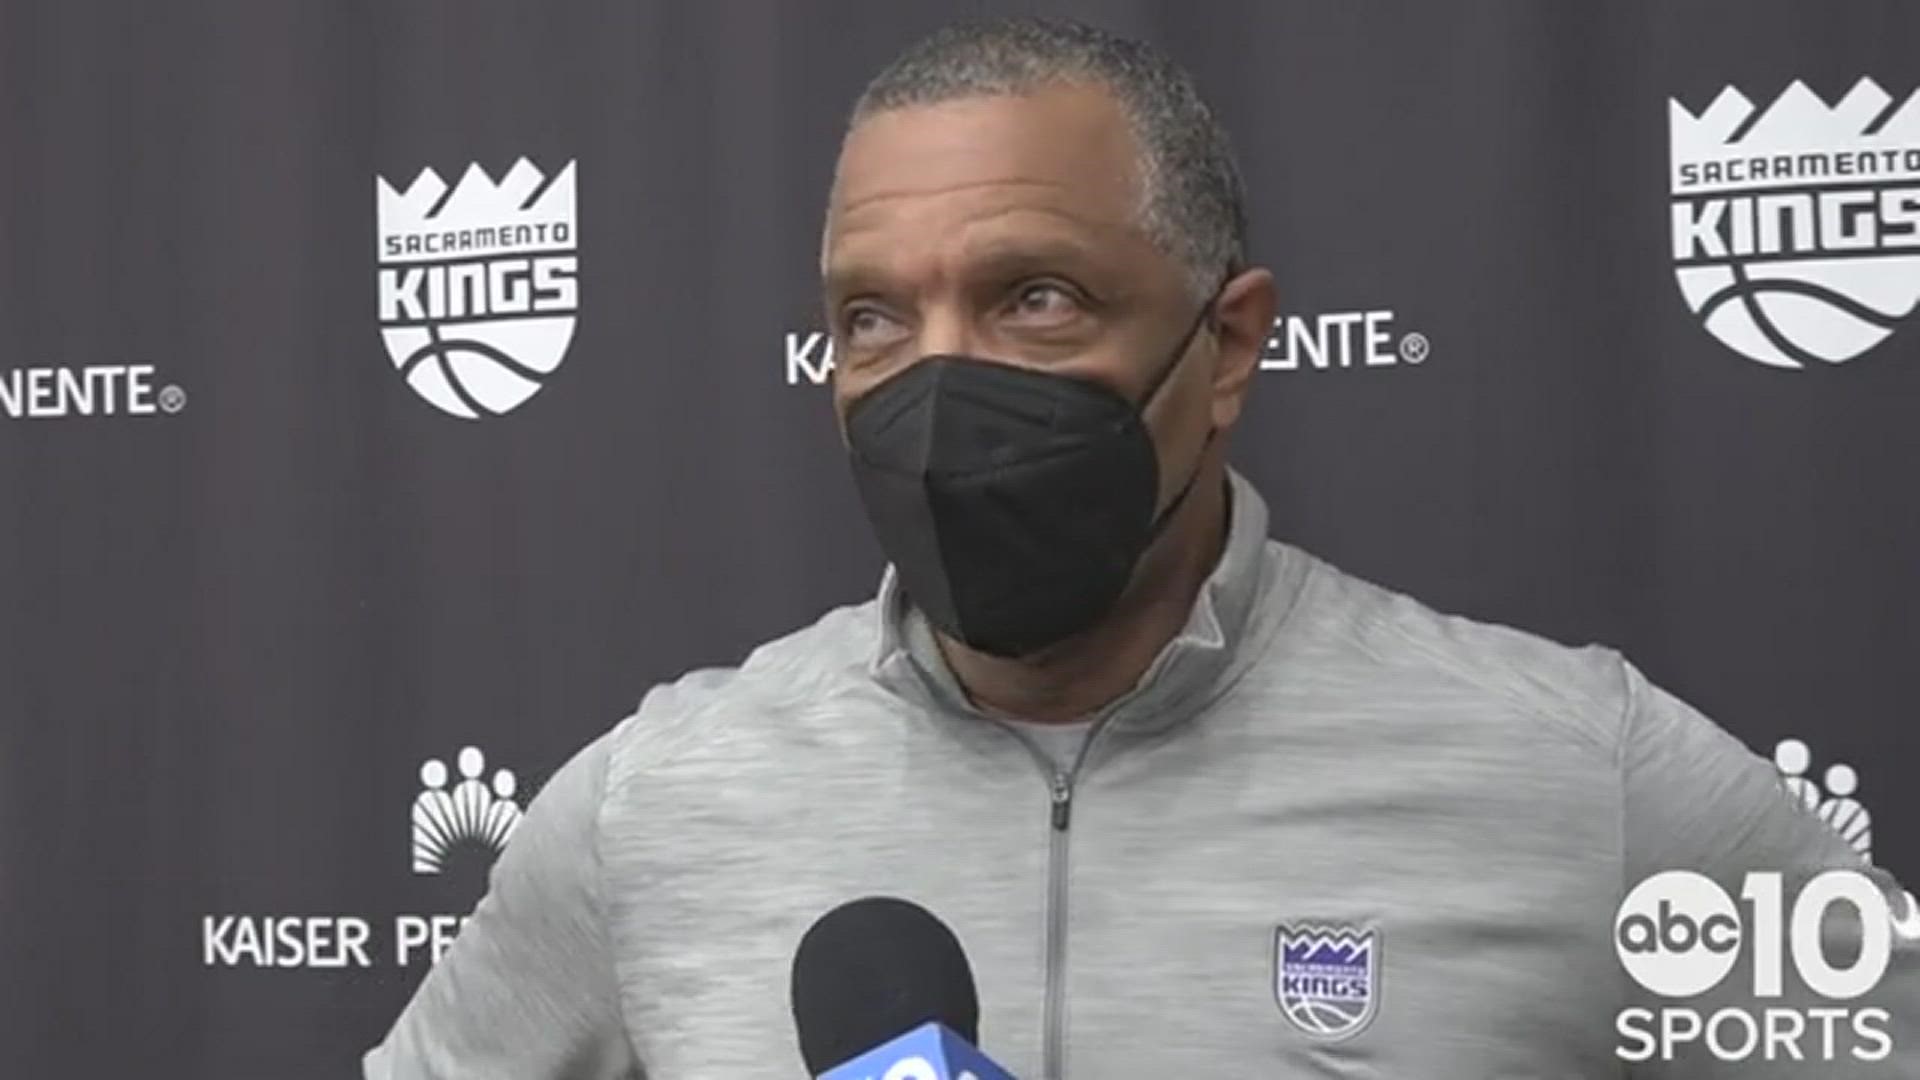 Kings interim head coach Alvin Gentry updates the media on his team returning from the All-Star break and taking advantage of two straight days of practice.